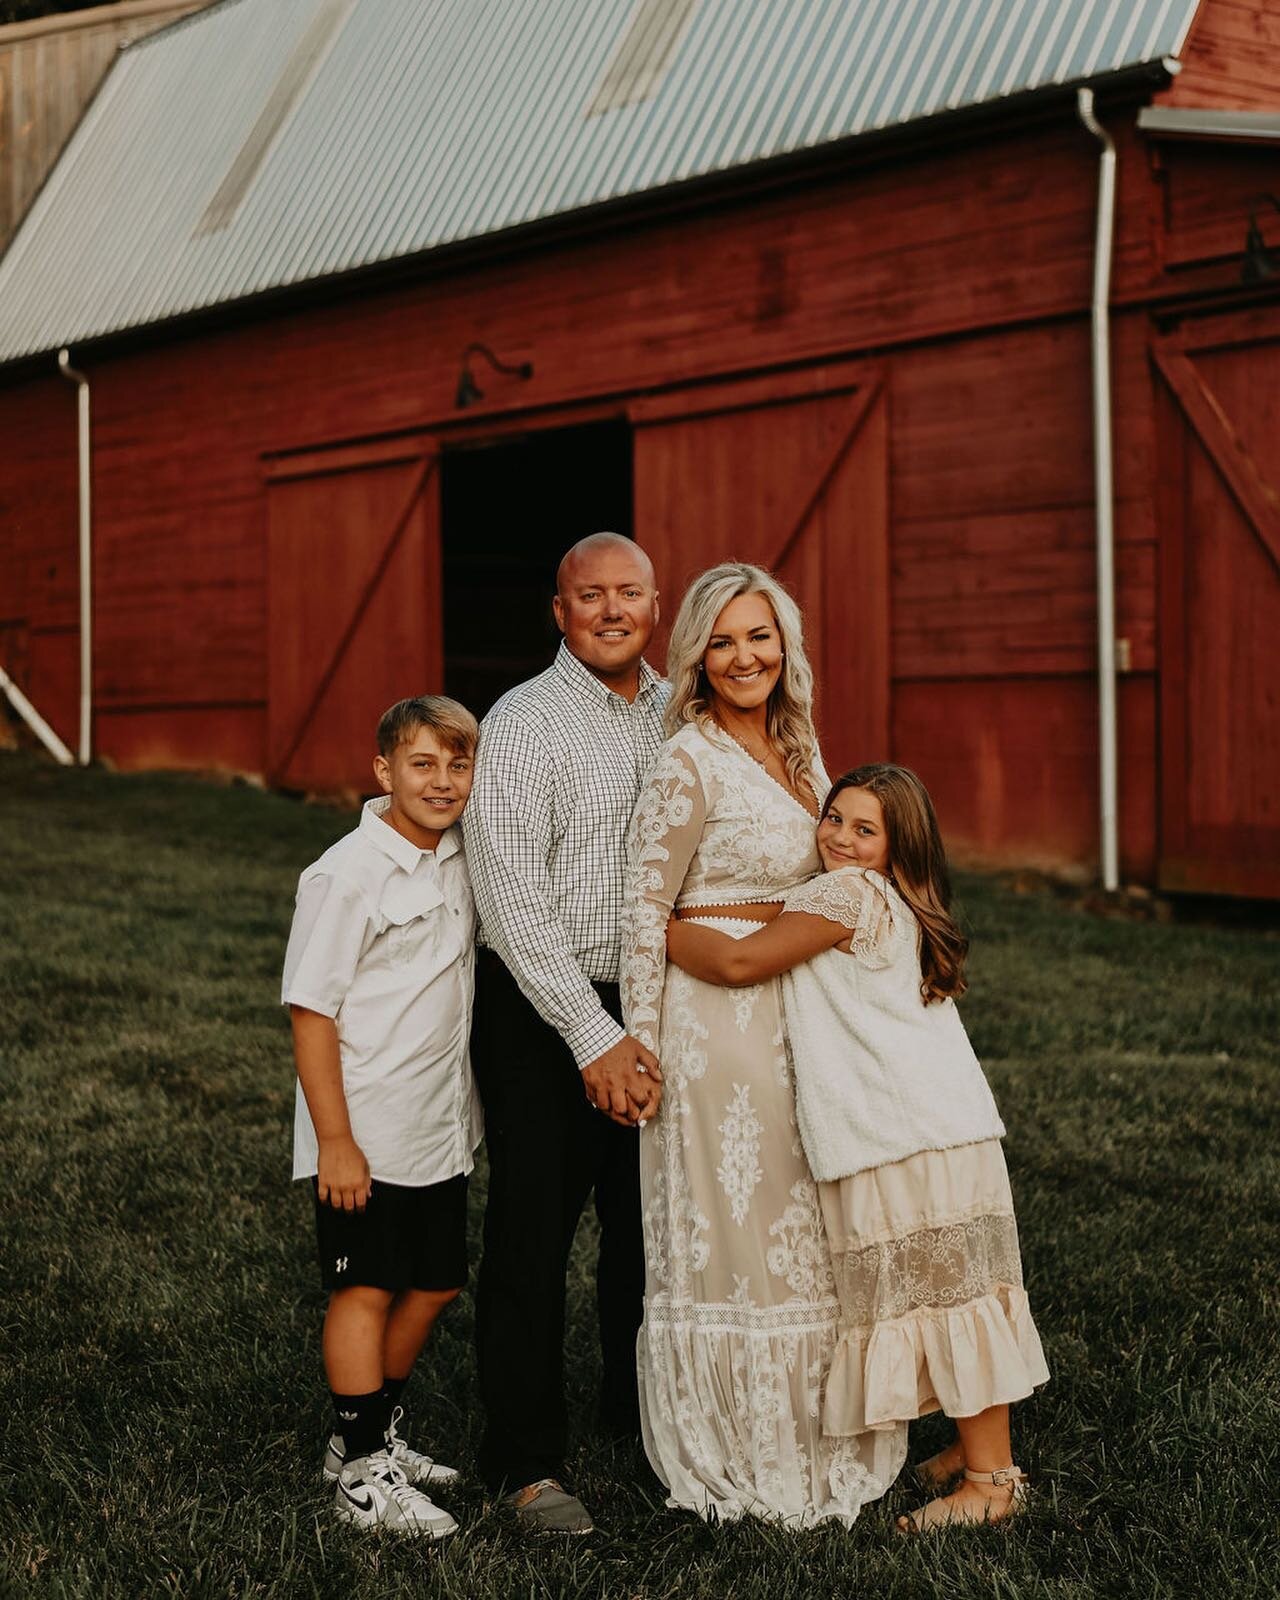 It&rsquo;s always fun to see family Christmas photos taken on our property. 

From engagement photos, to bridal portraits, to maternity shoots, family and more&hellip; we love getting to be the backdrop of such special memories! 

📸: @dom.inique.phi